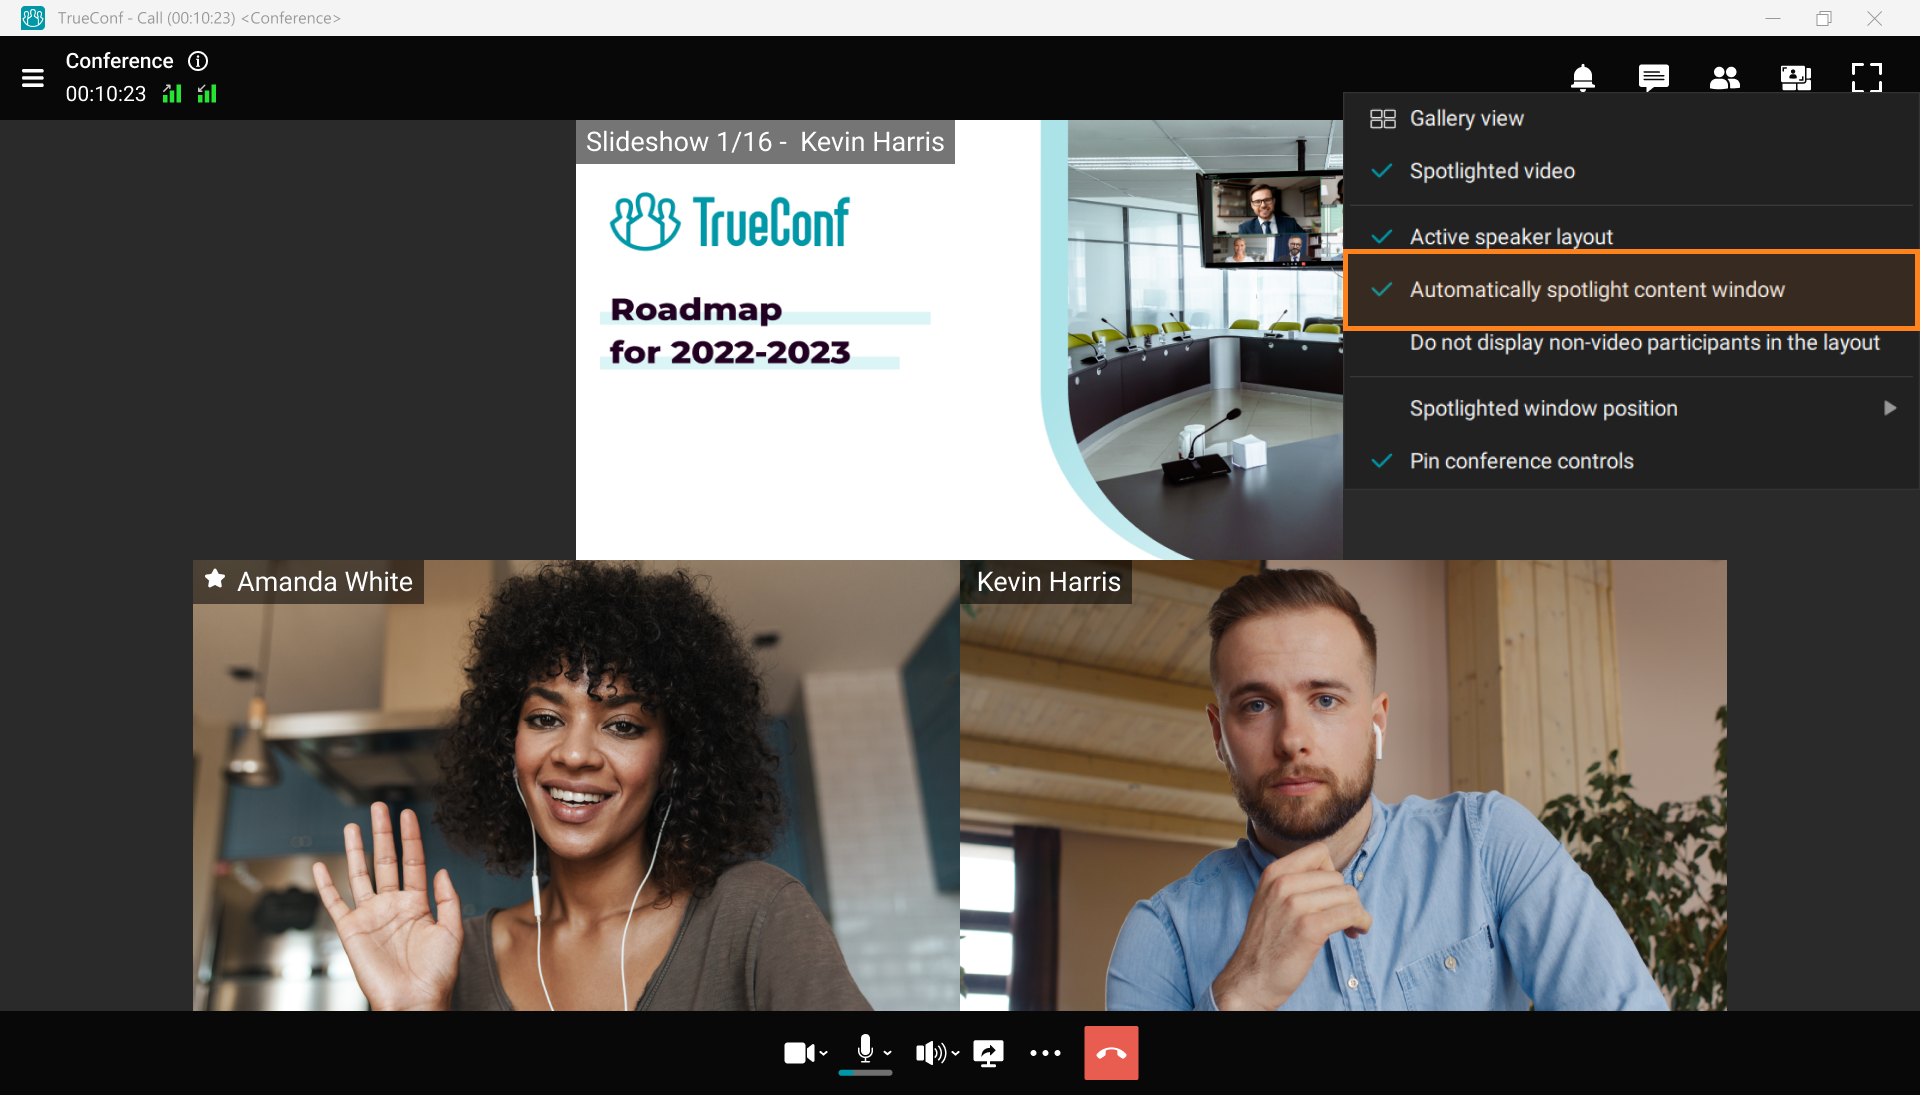 TrueConf 8.1 for Windows: Enhanced team messaging, media player for recordings, and automatic content spotlight 5